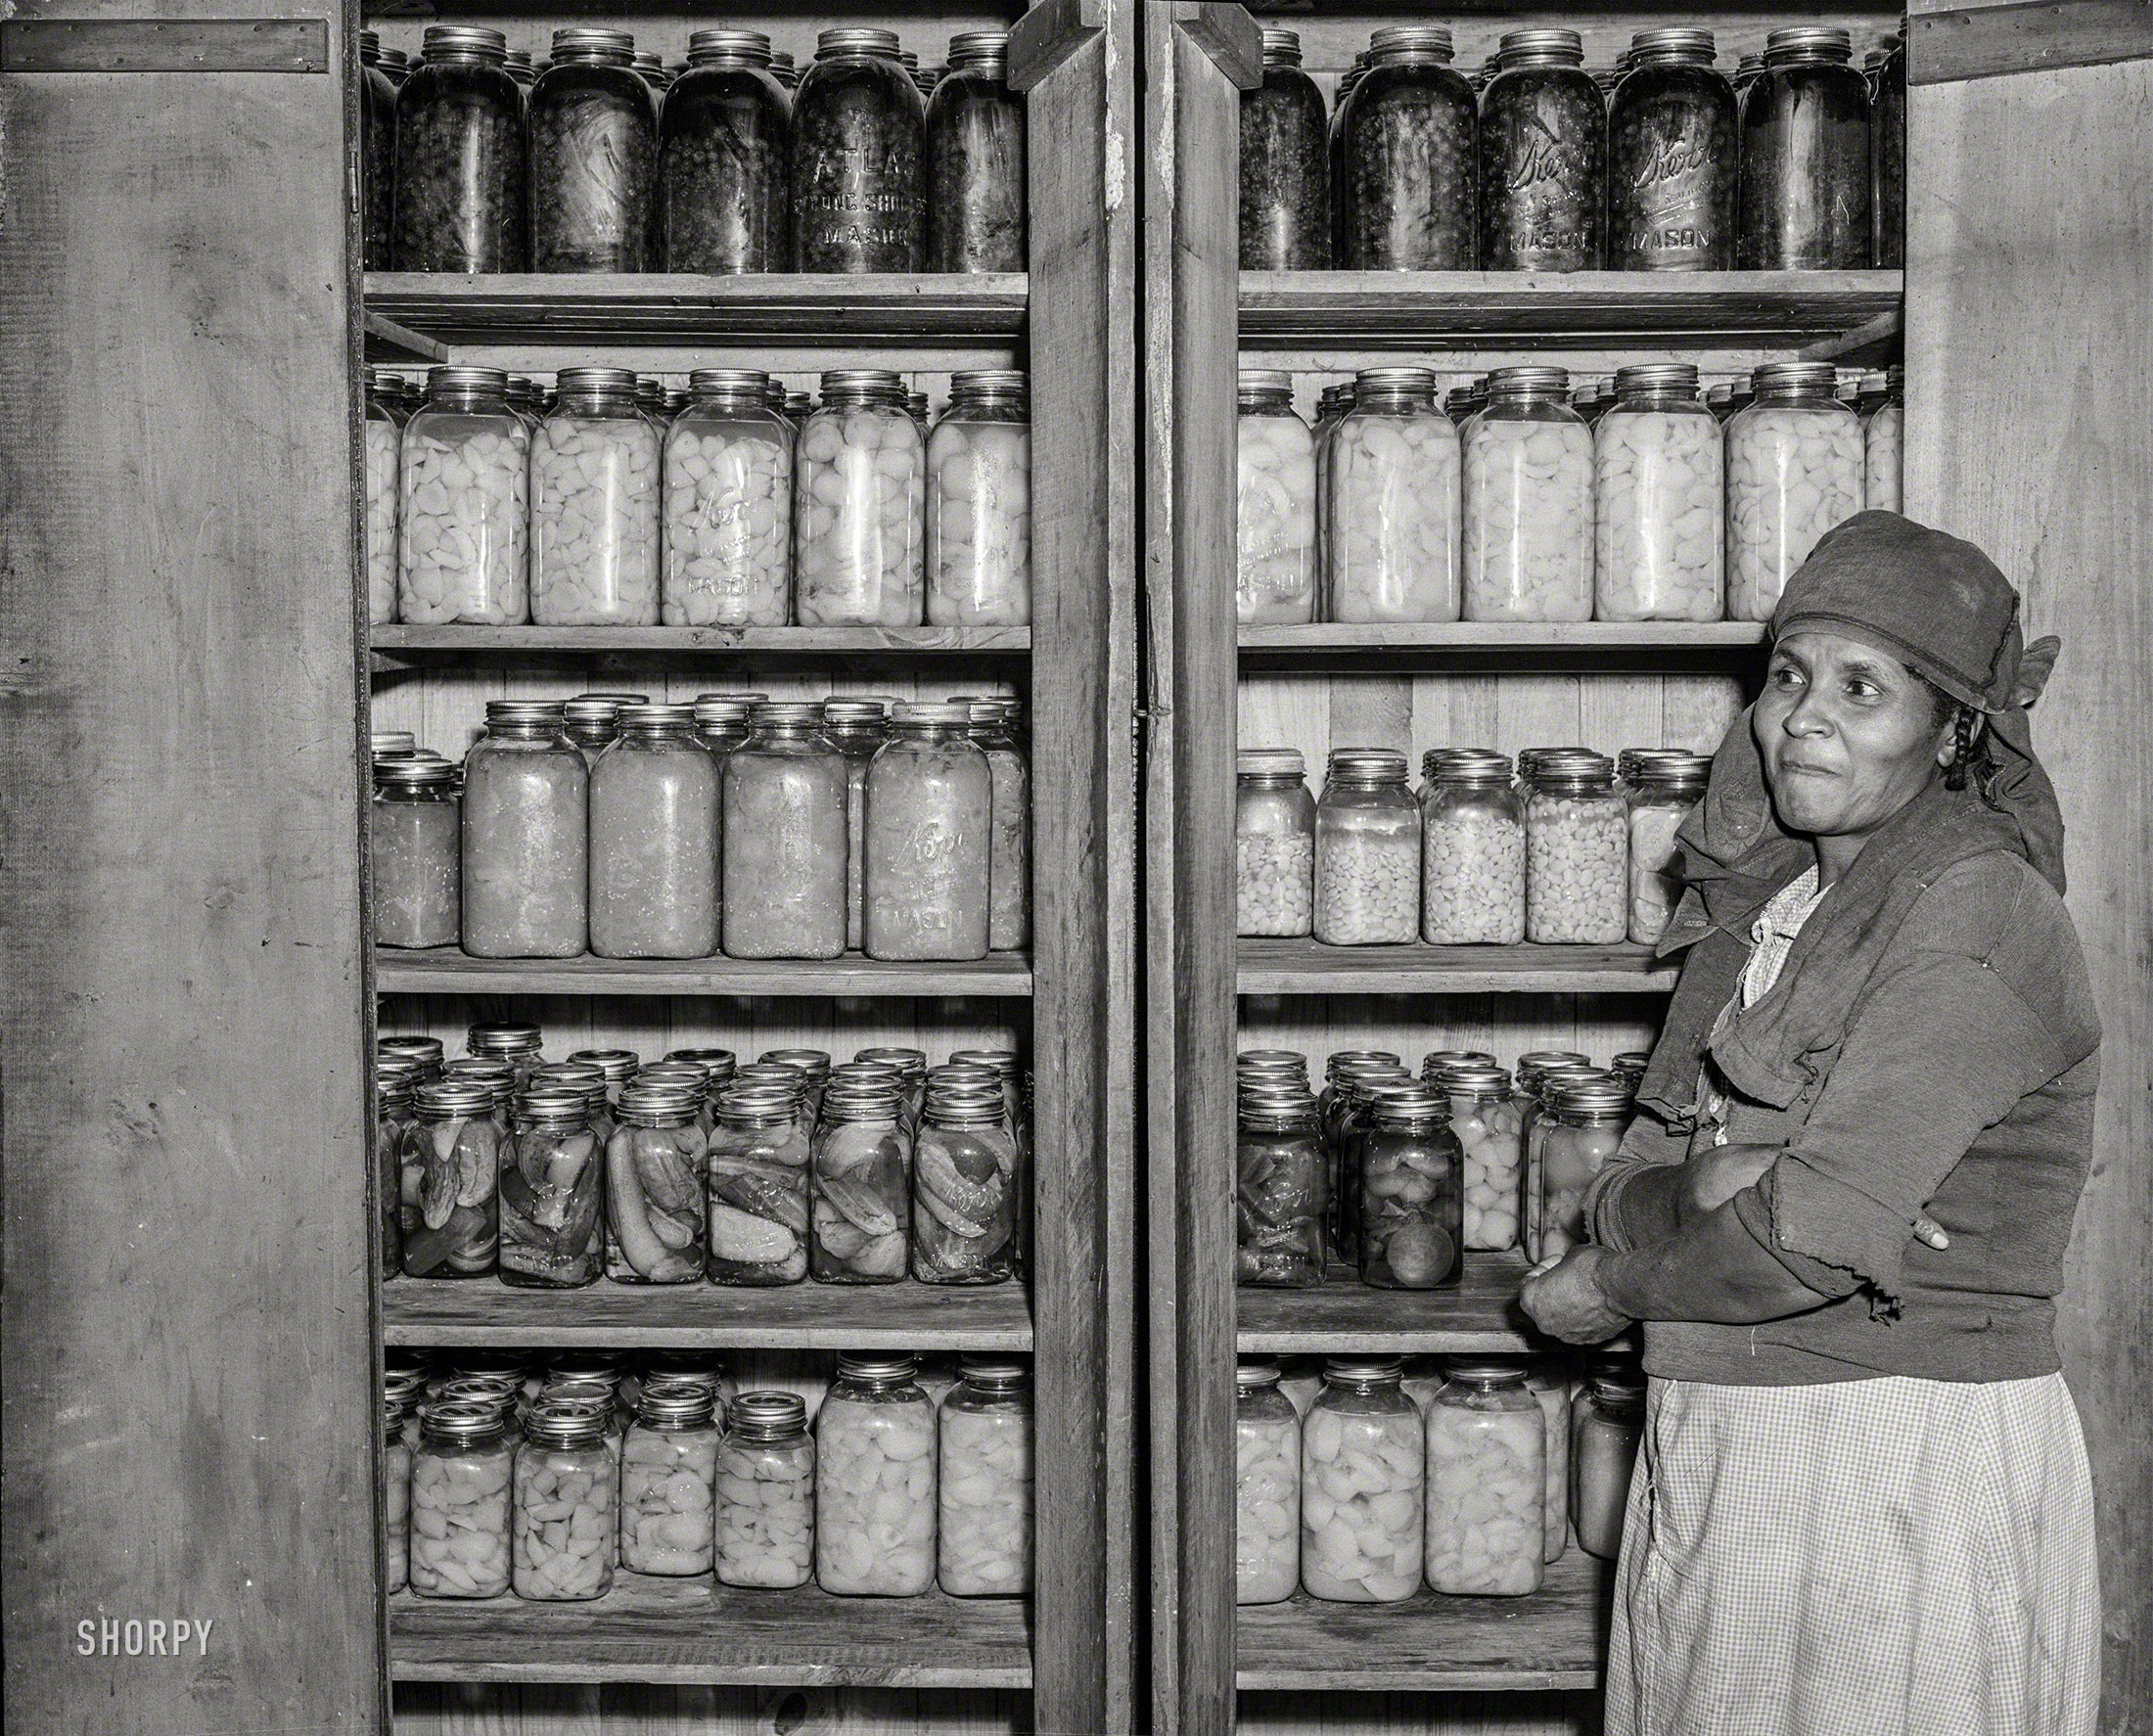 November 1941. "Mrs. Buck Grant, Farm Security Administration client, with her canned goods. Near Woodville, Georgia." Photo by Jack Delano. View full size.